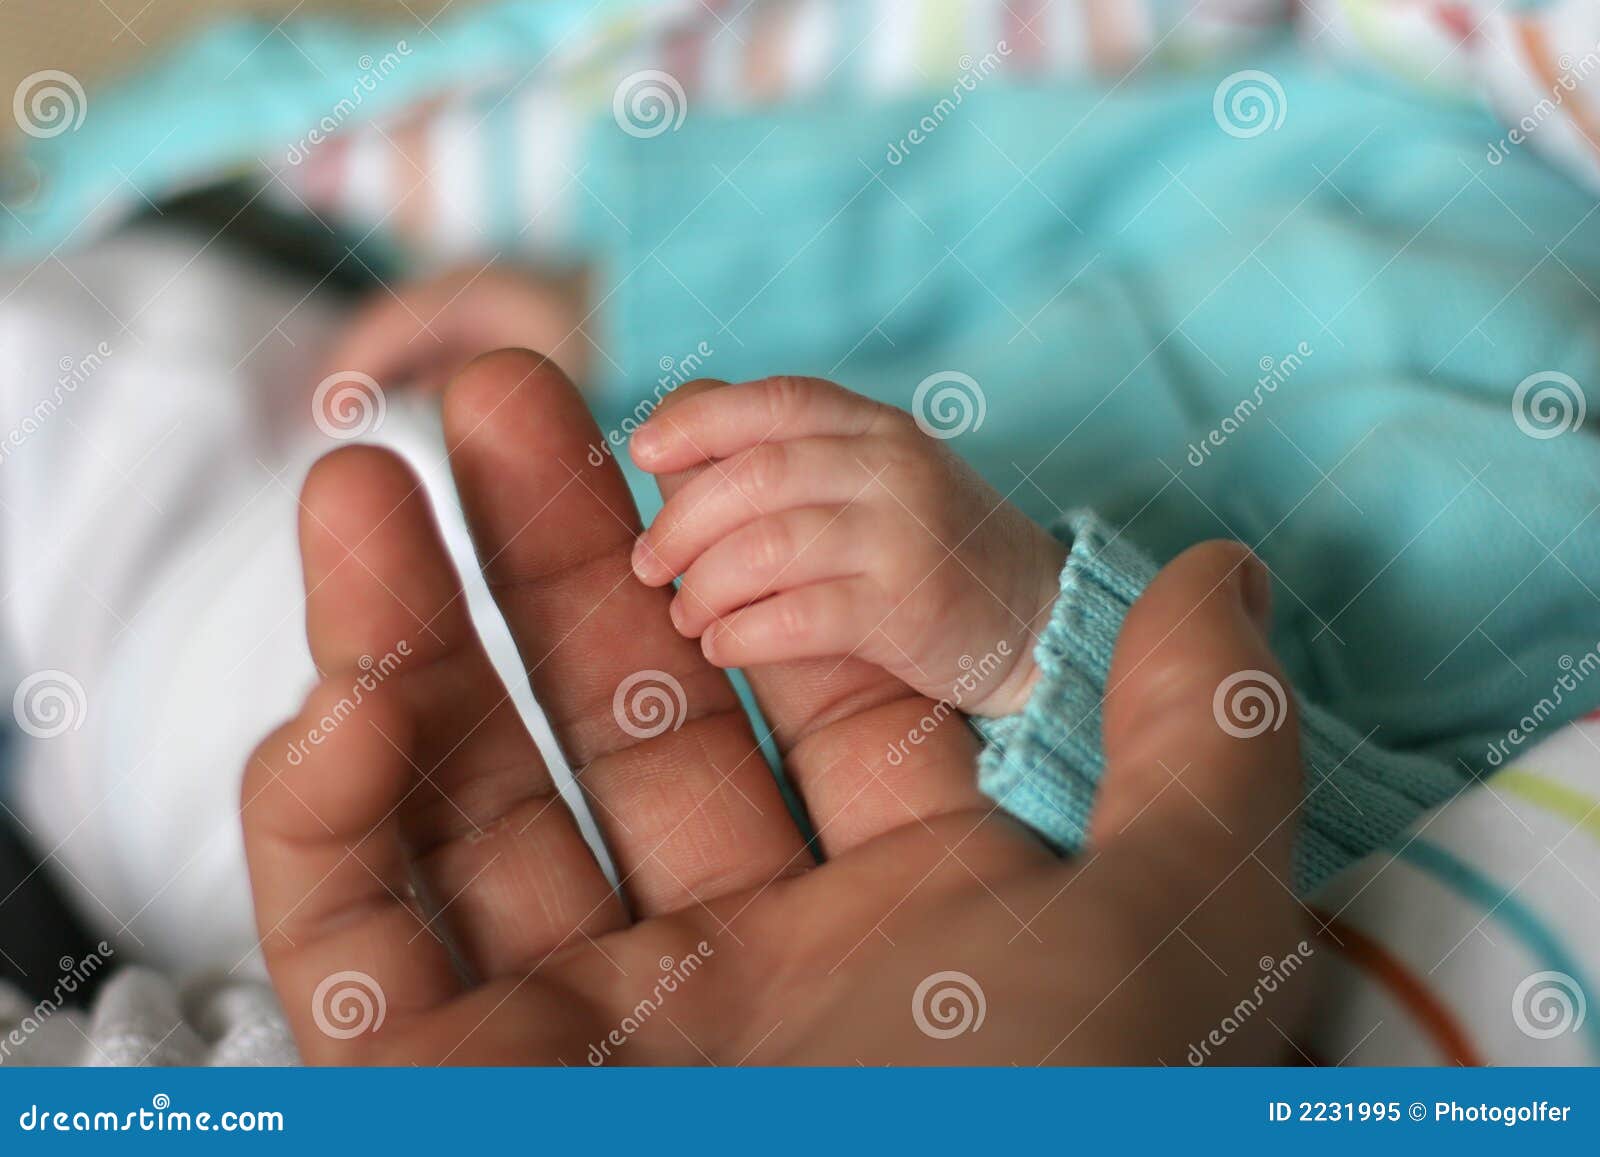 baby hands with father